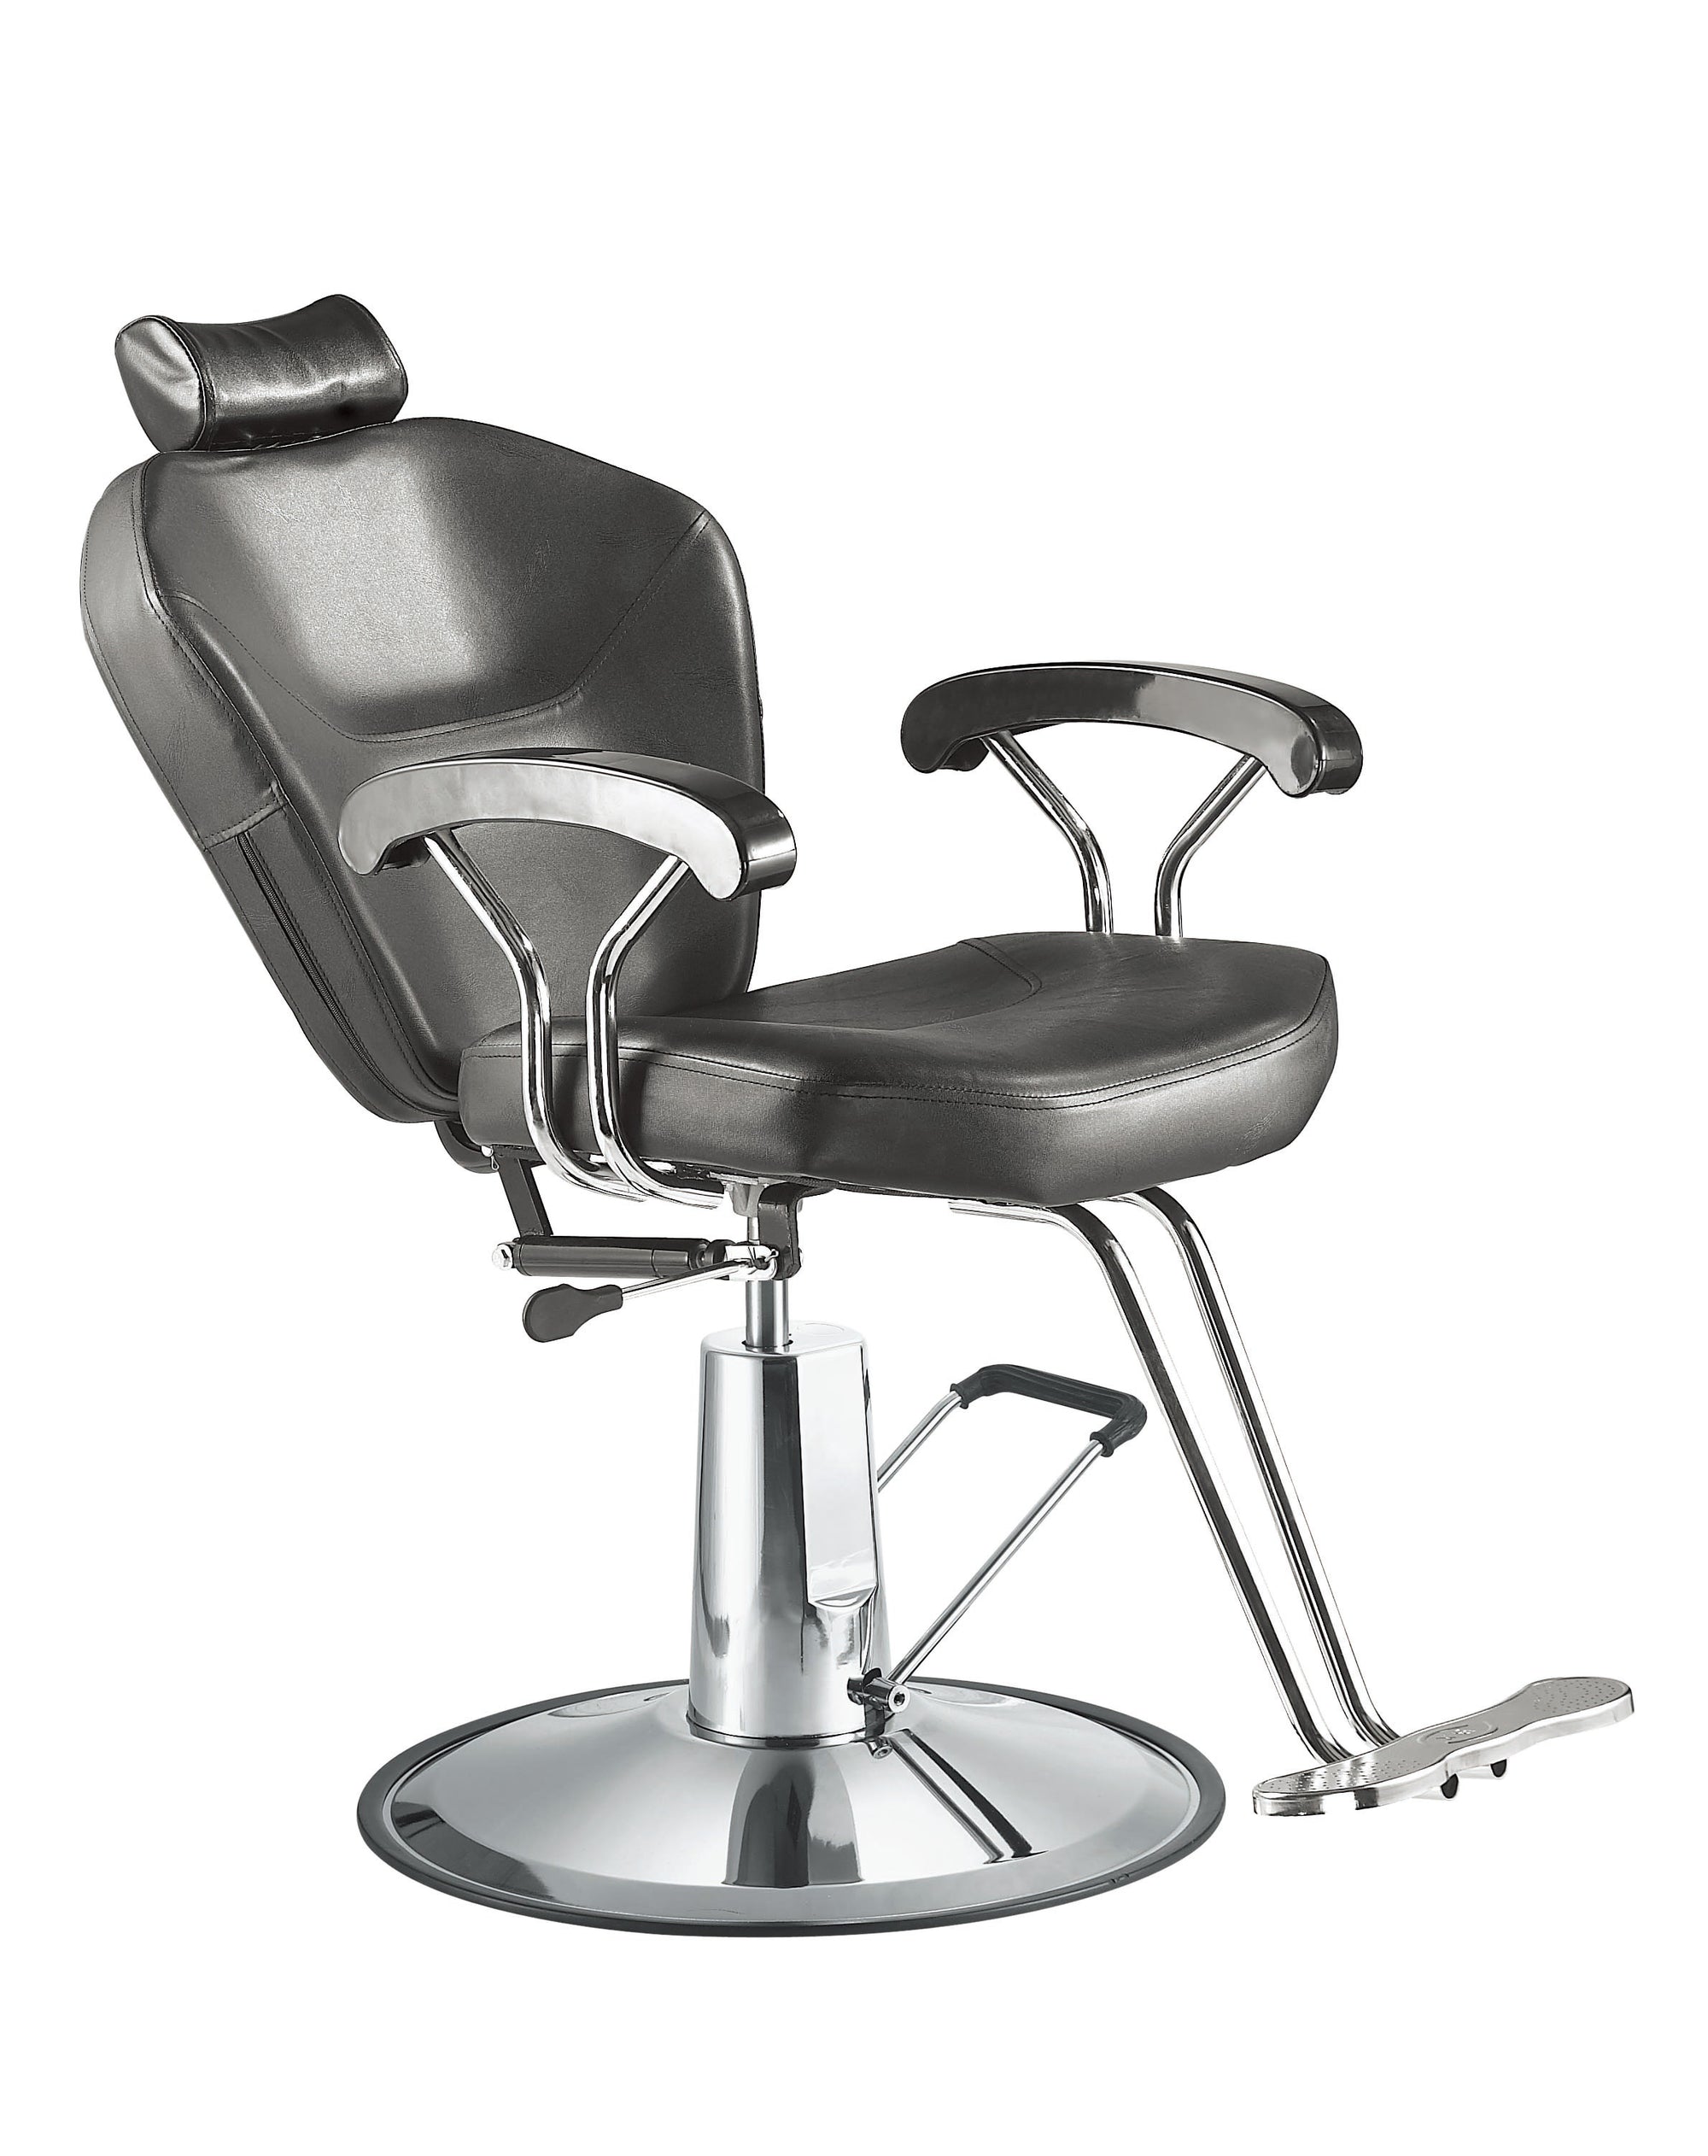 Pro styling chair